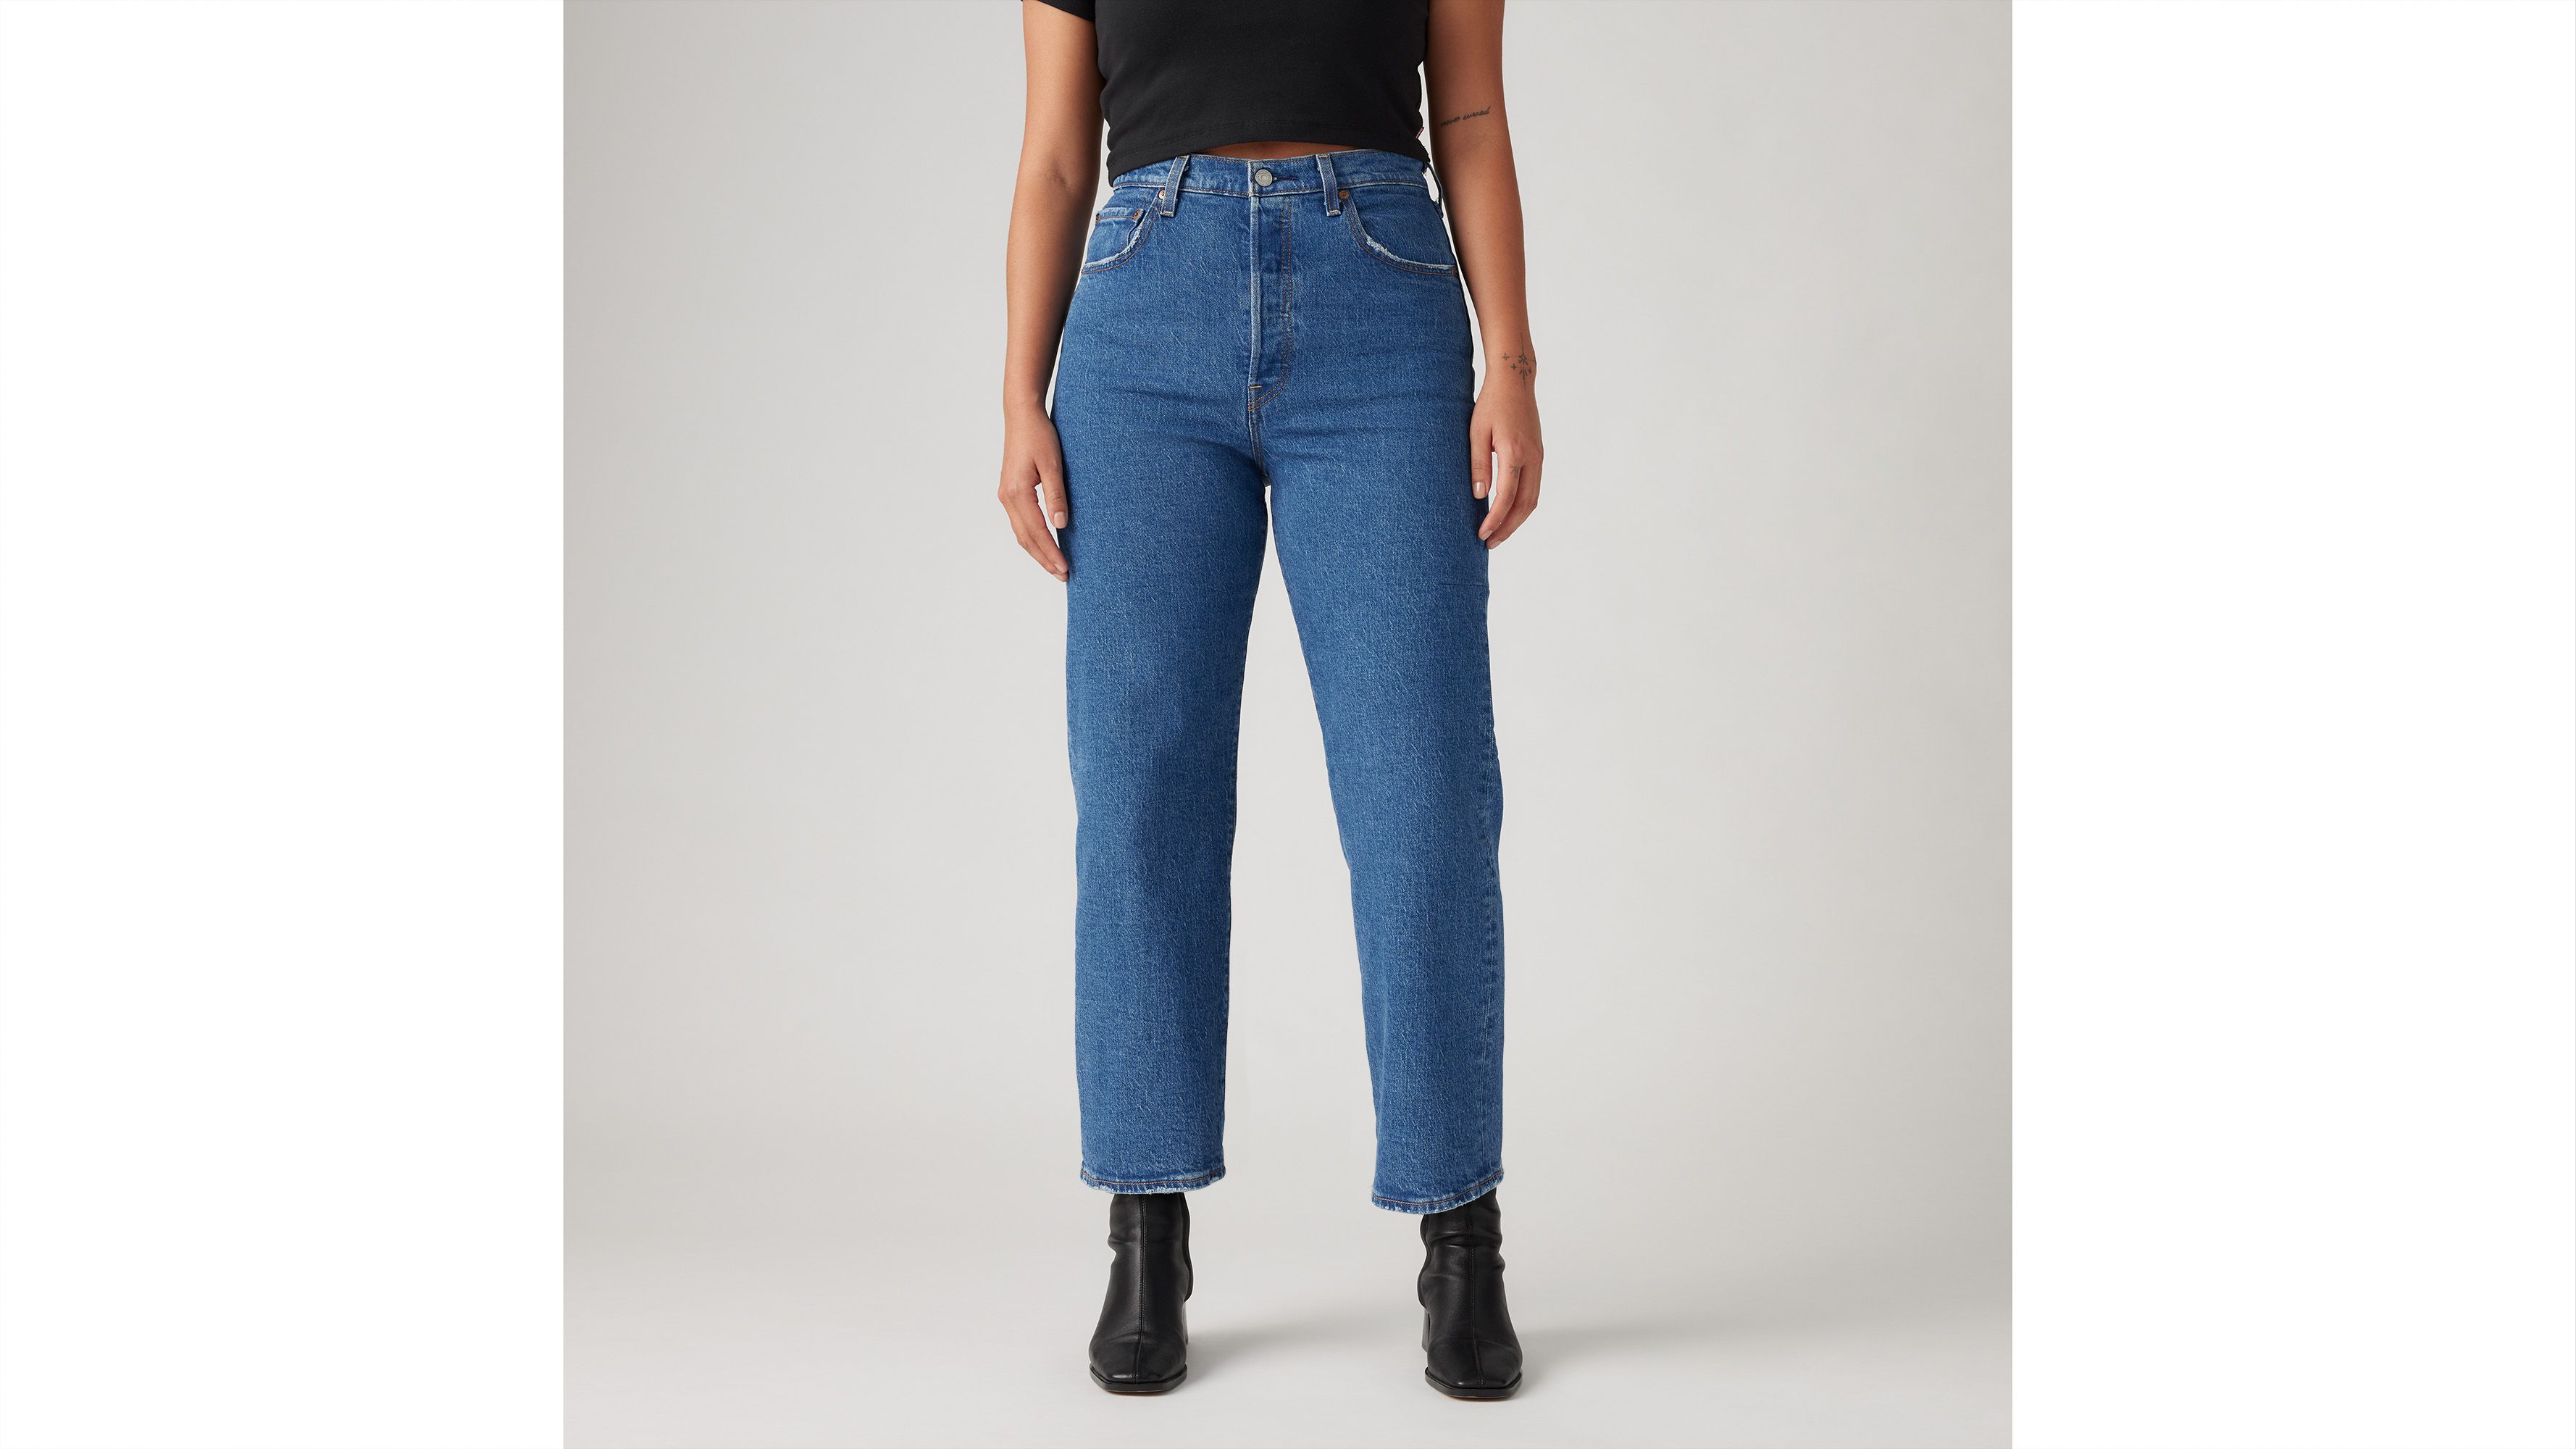 Levi's Ribcage Straight Ankle Women's Jeans - Maude